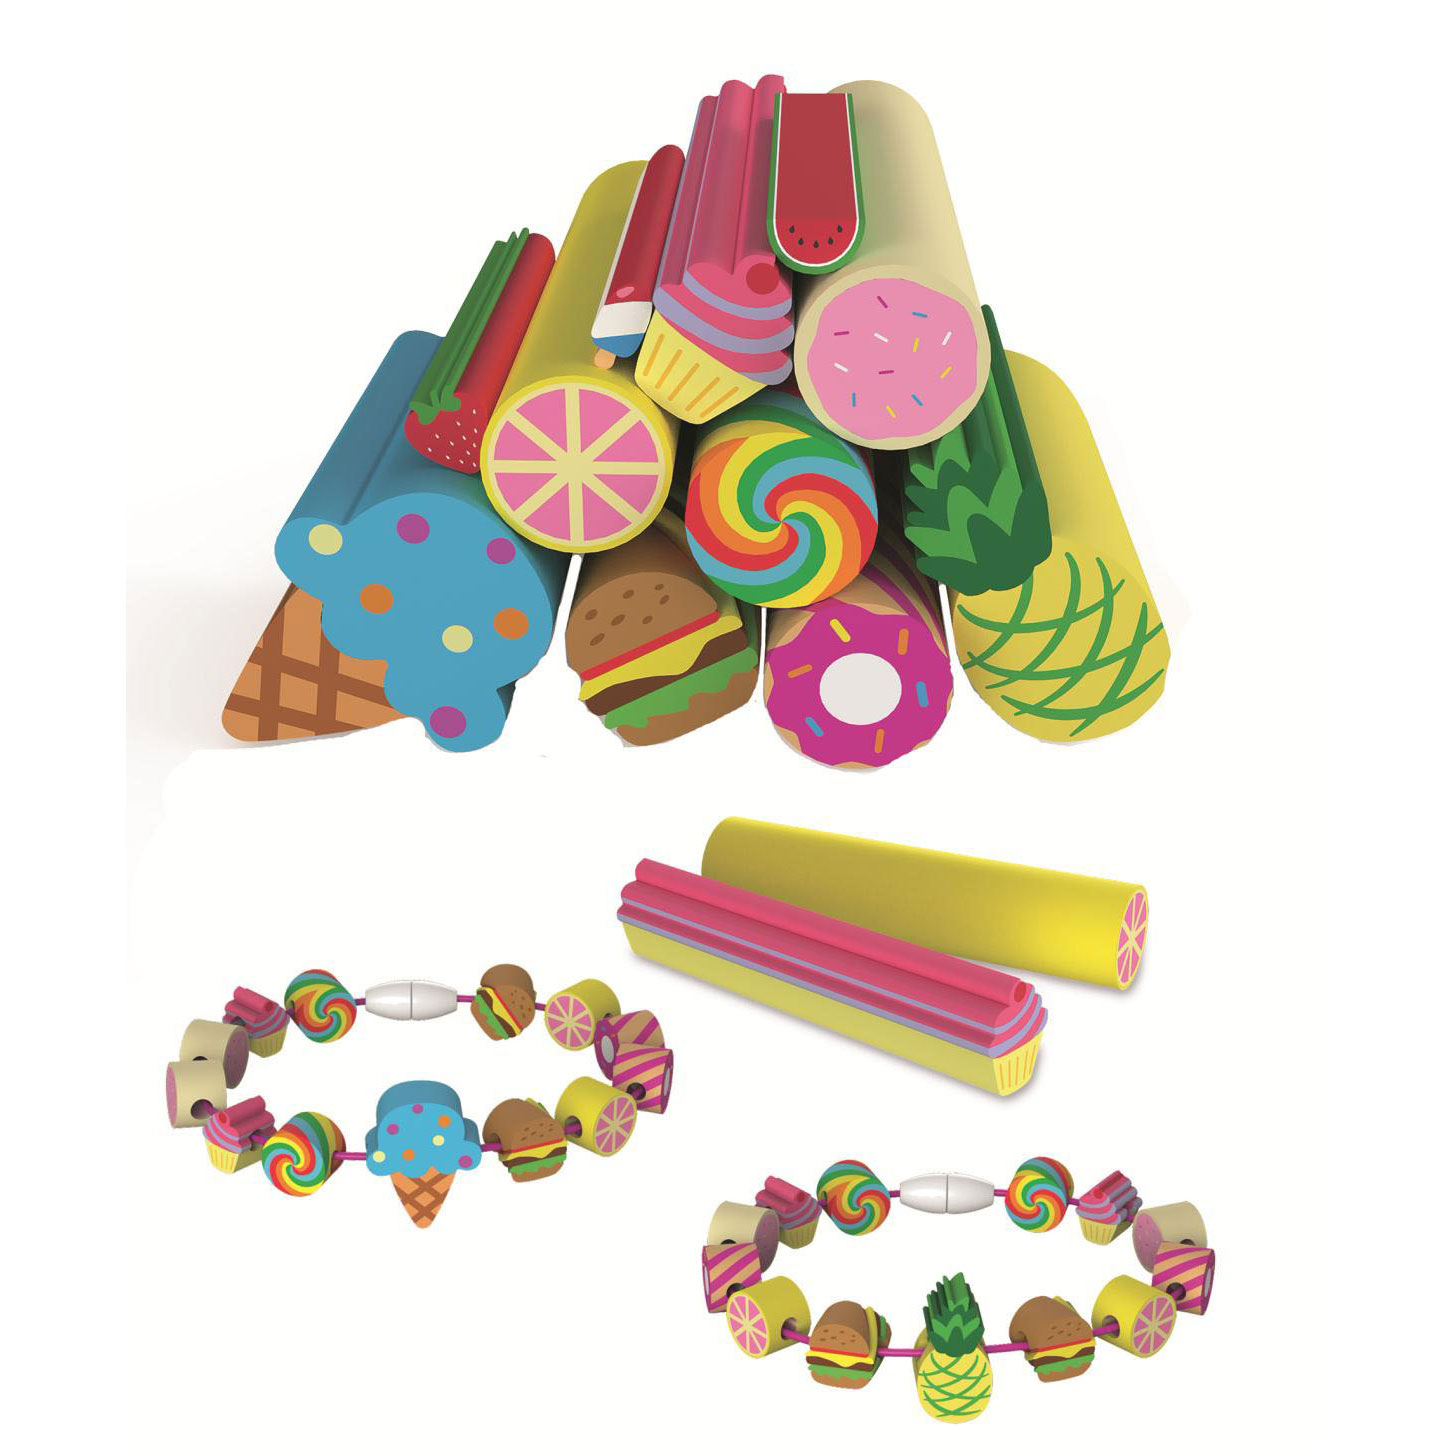  John Adams, Cutie Stix Refill Happy Pack: to use with The Cutie  Stix Creation Set and Creative Workshop, Arts & Crafts